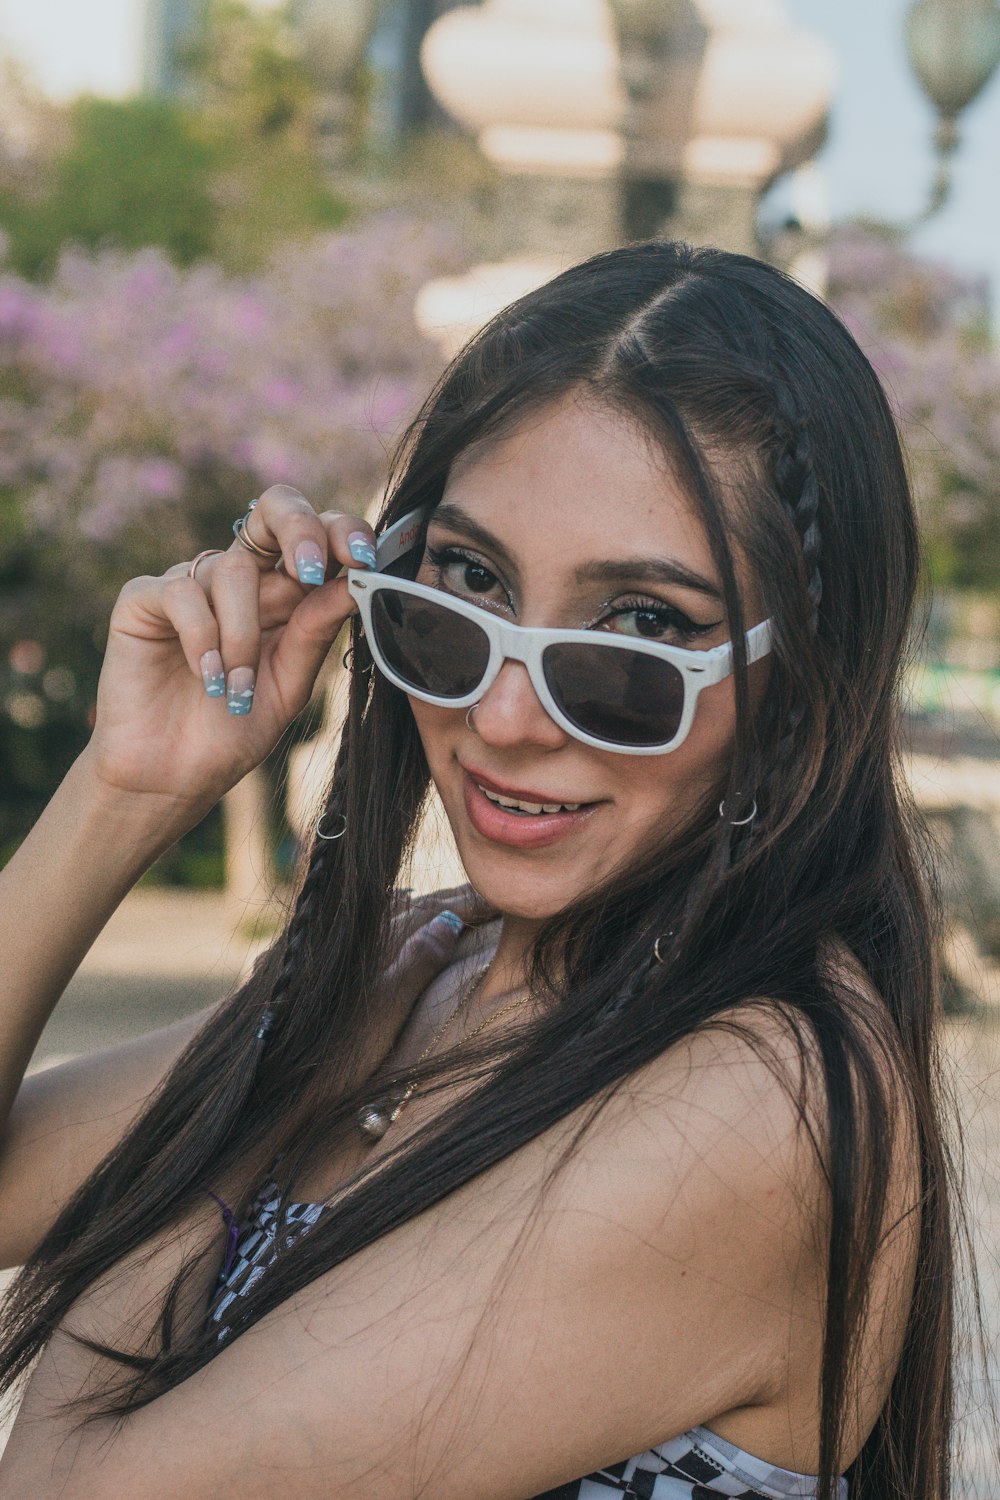 a woman wearing sunglasses posing for a picture